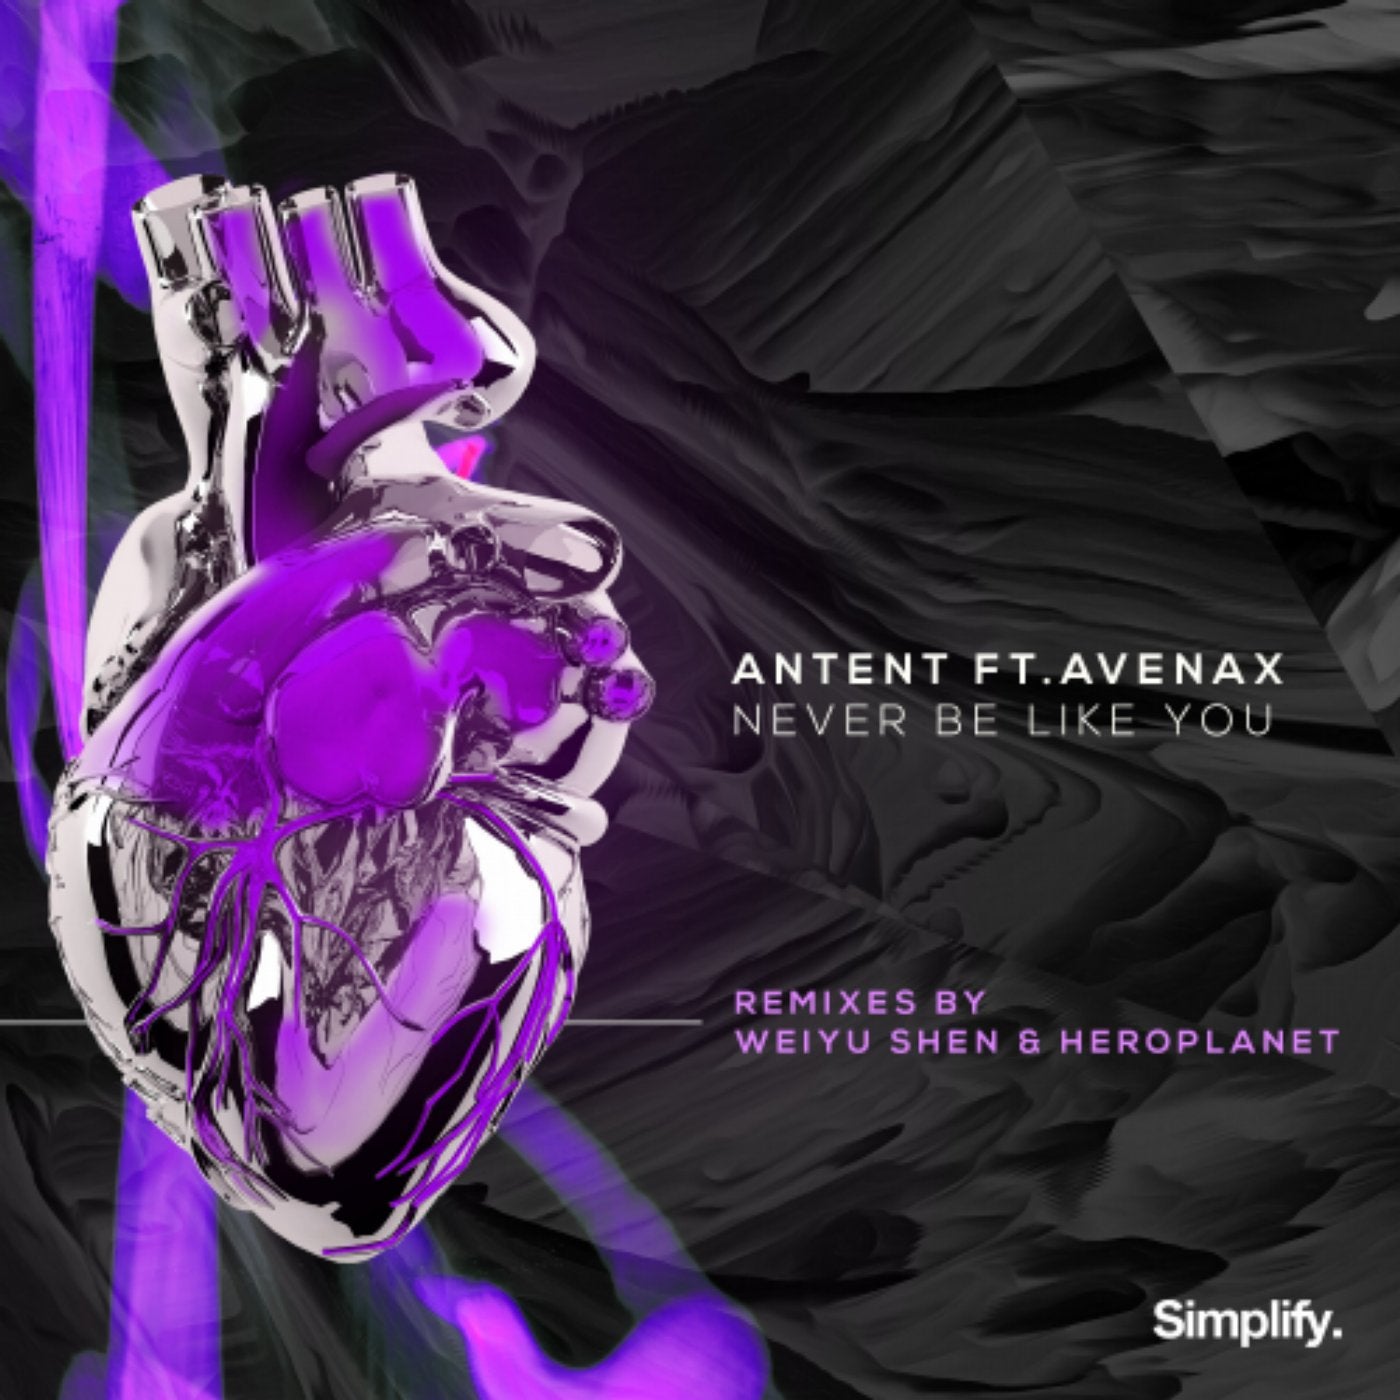 Antent hope to see you again. Avenax. Antent. UNDXXD Antent believe. Antent Pulse Remixes.